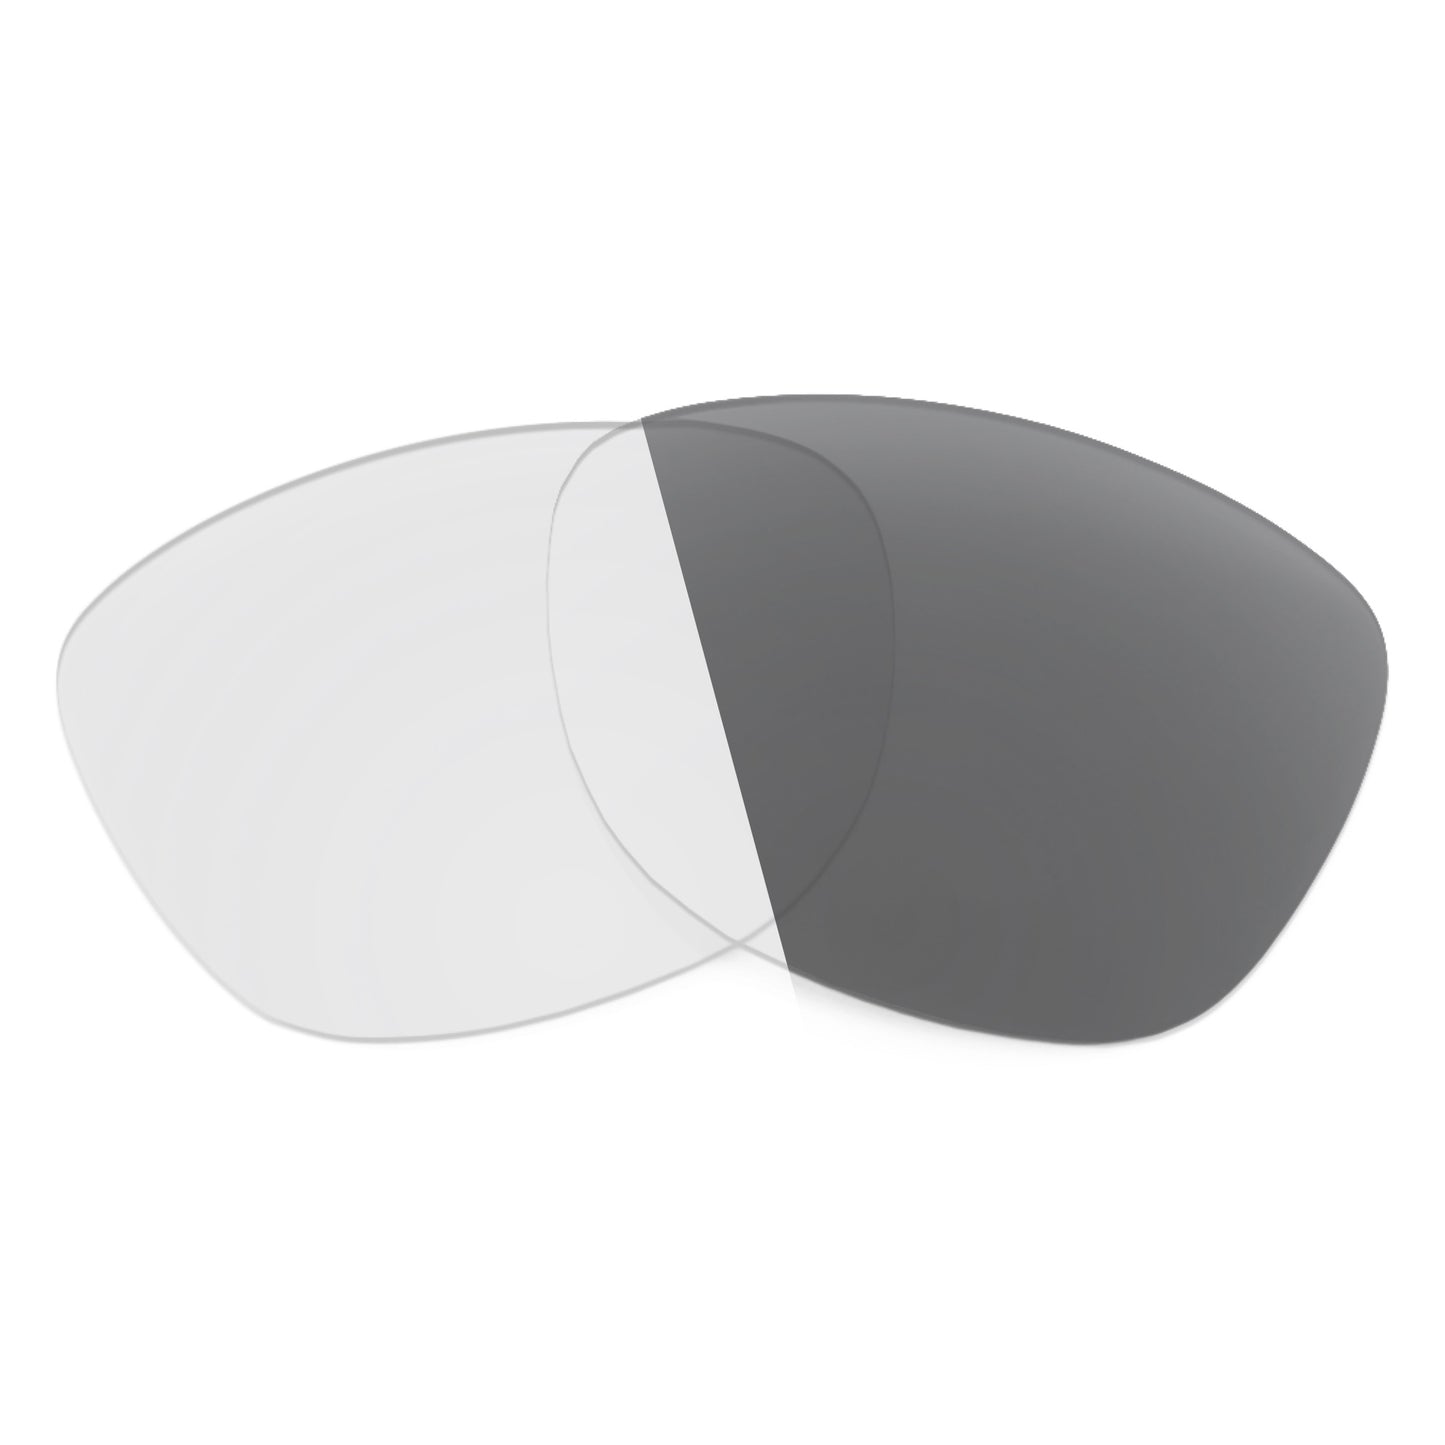 Revant replacement lenses for Ray-Ban Caribbean RB4148 52mm Non-Polarized Adapt Gray Photochromic